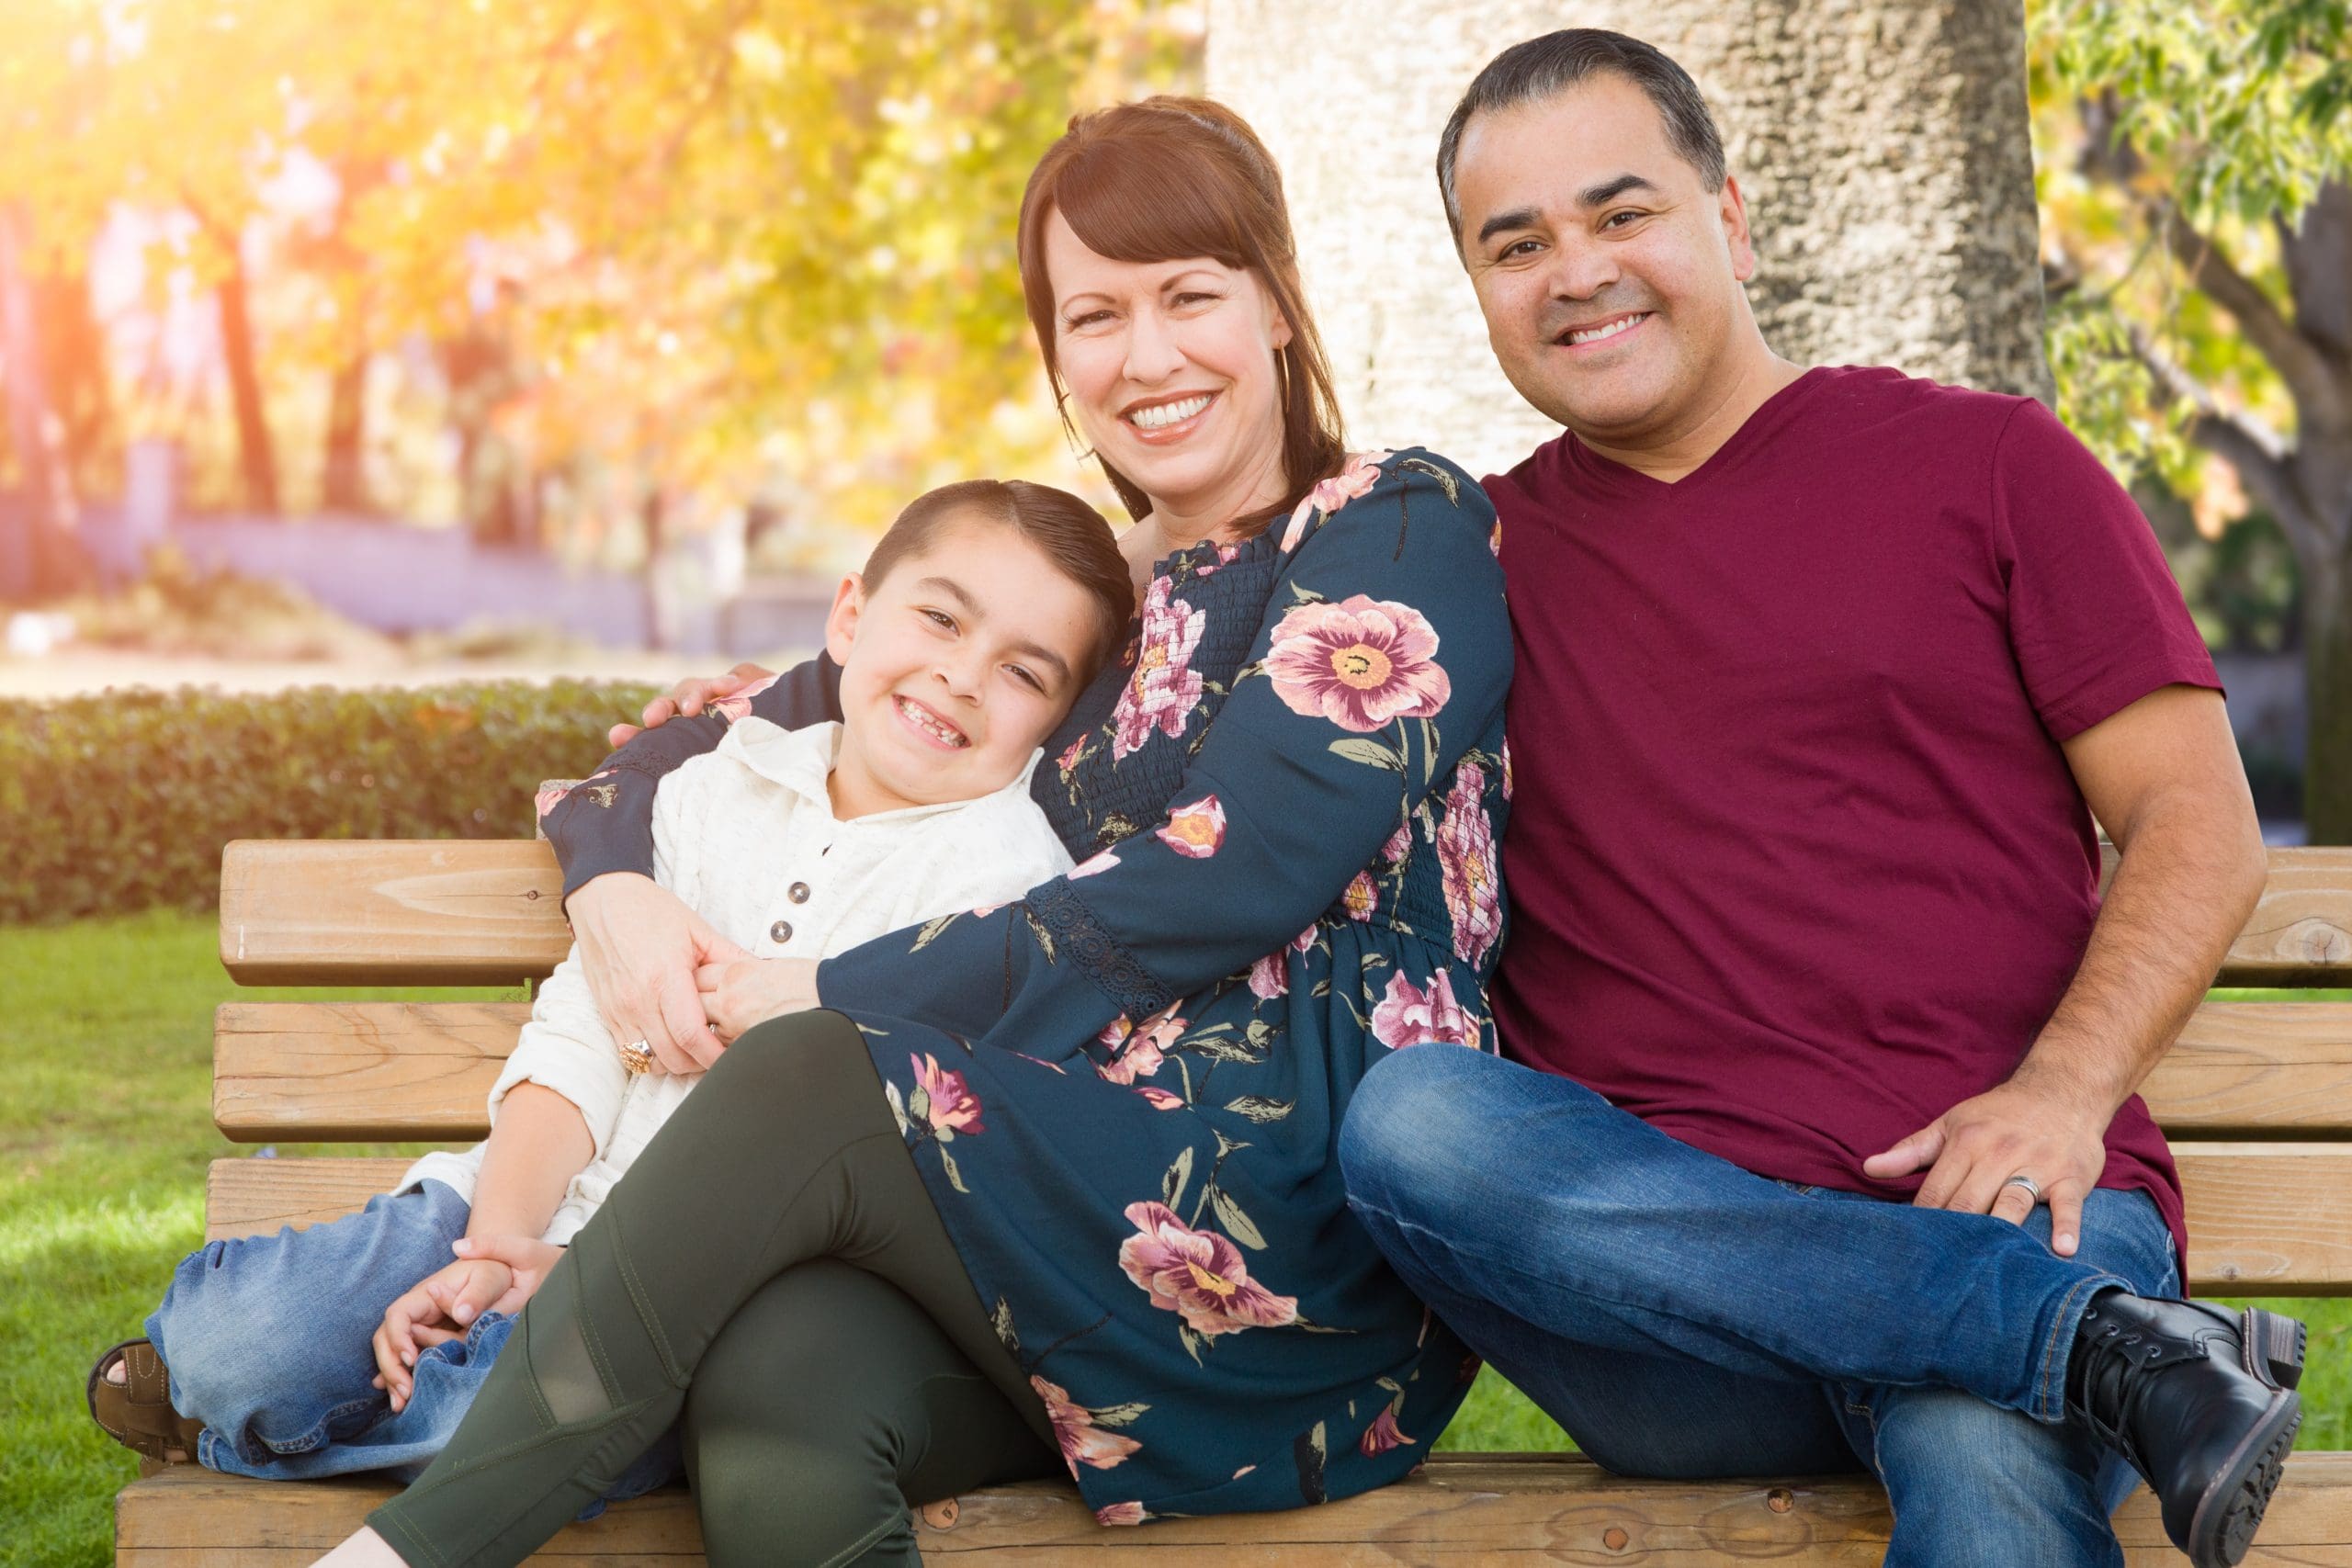 Parents sitting on bench with sons smiling